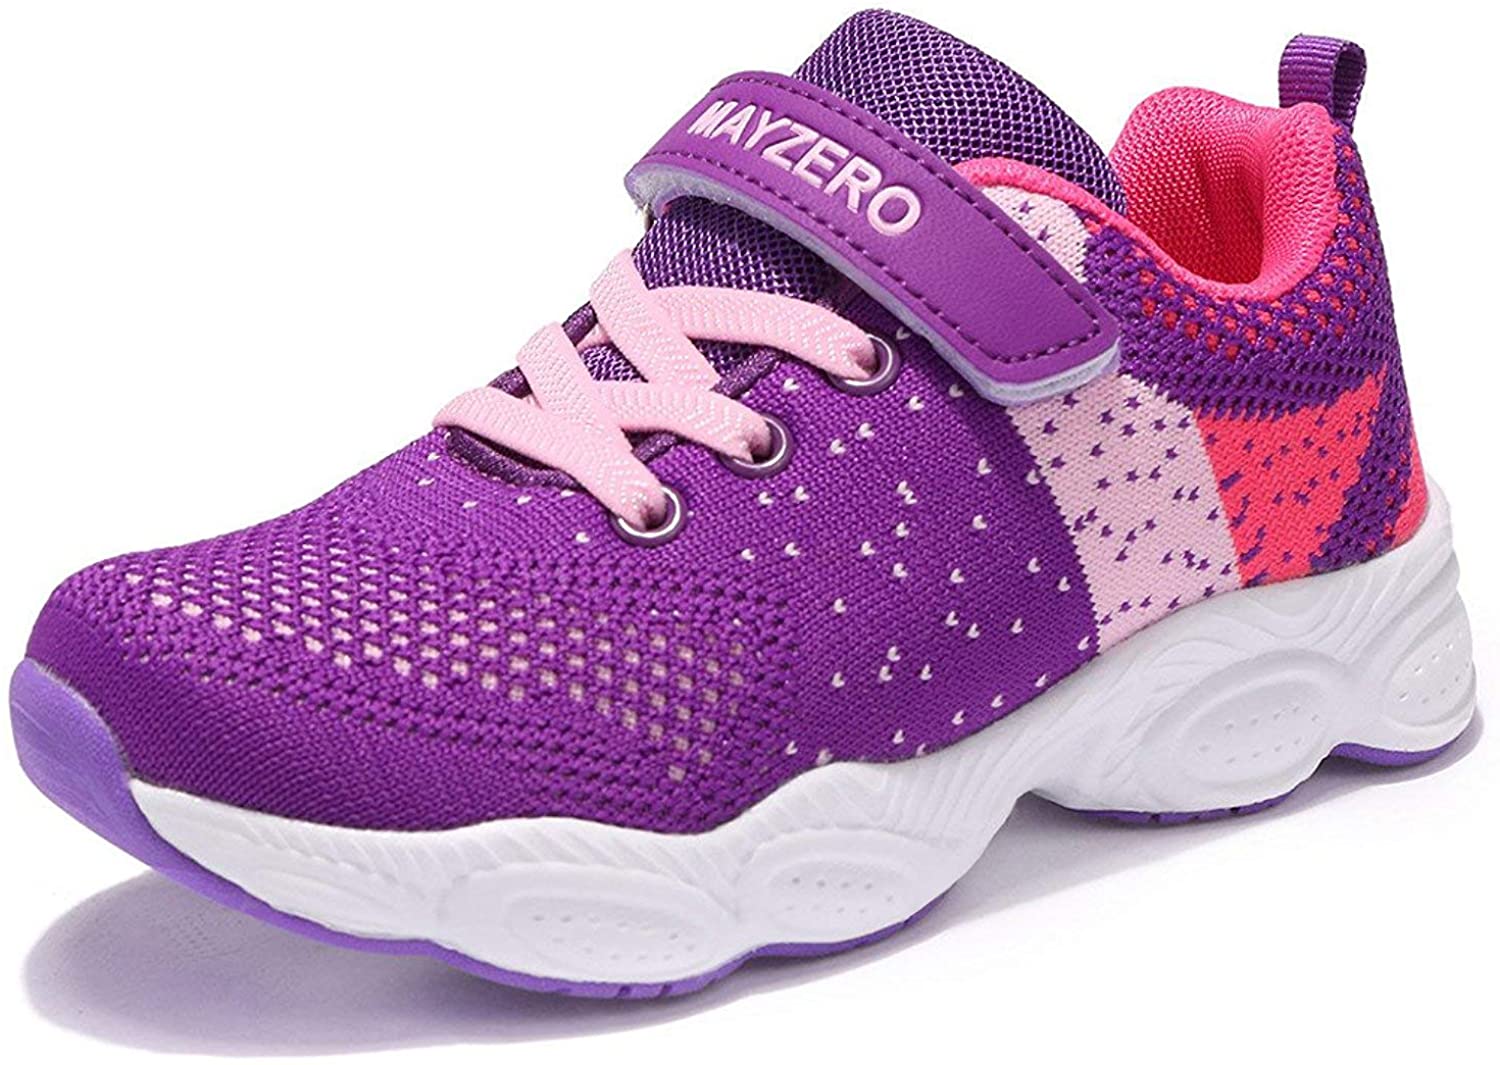 MAYZERO Kids Tennis Shoes Breathable Running Shoes Lightweight Athletic Shoes Walking Shoes Fashion Sneakers for Boys and Girls 